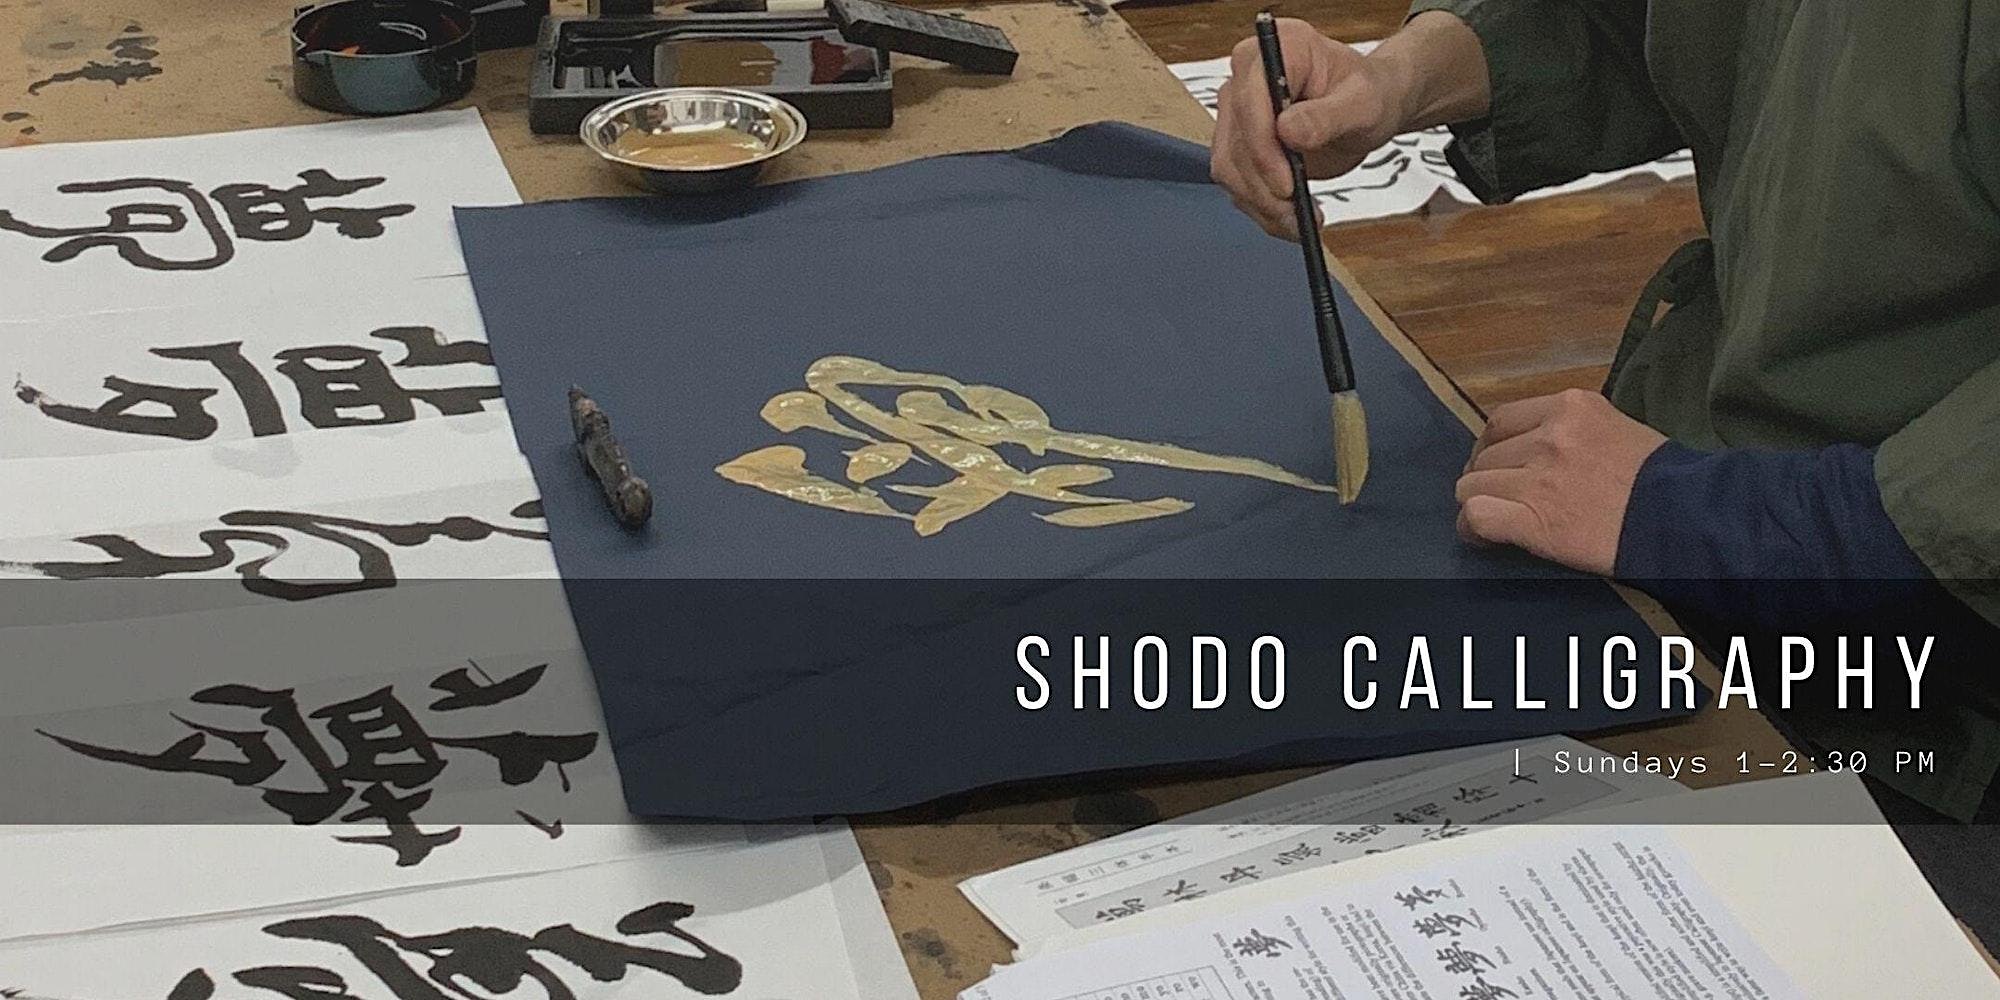 Calligraphy Paper for Shodo: Which One is Best?